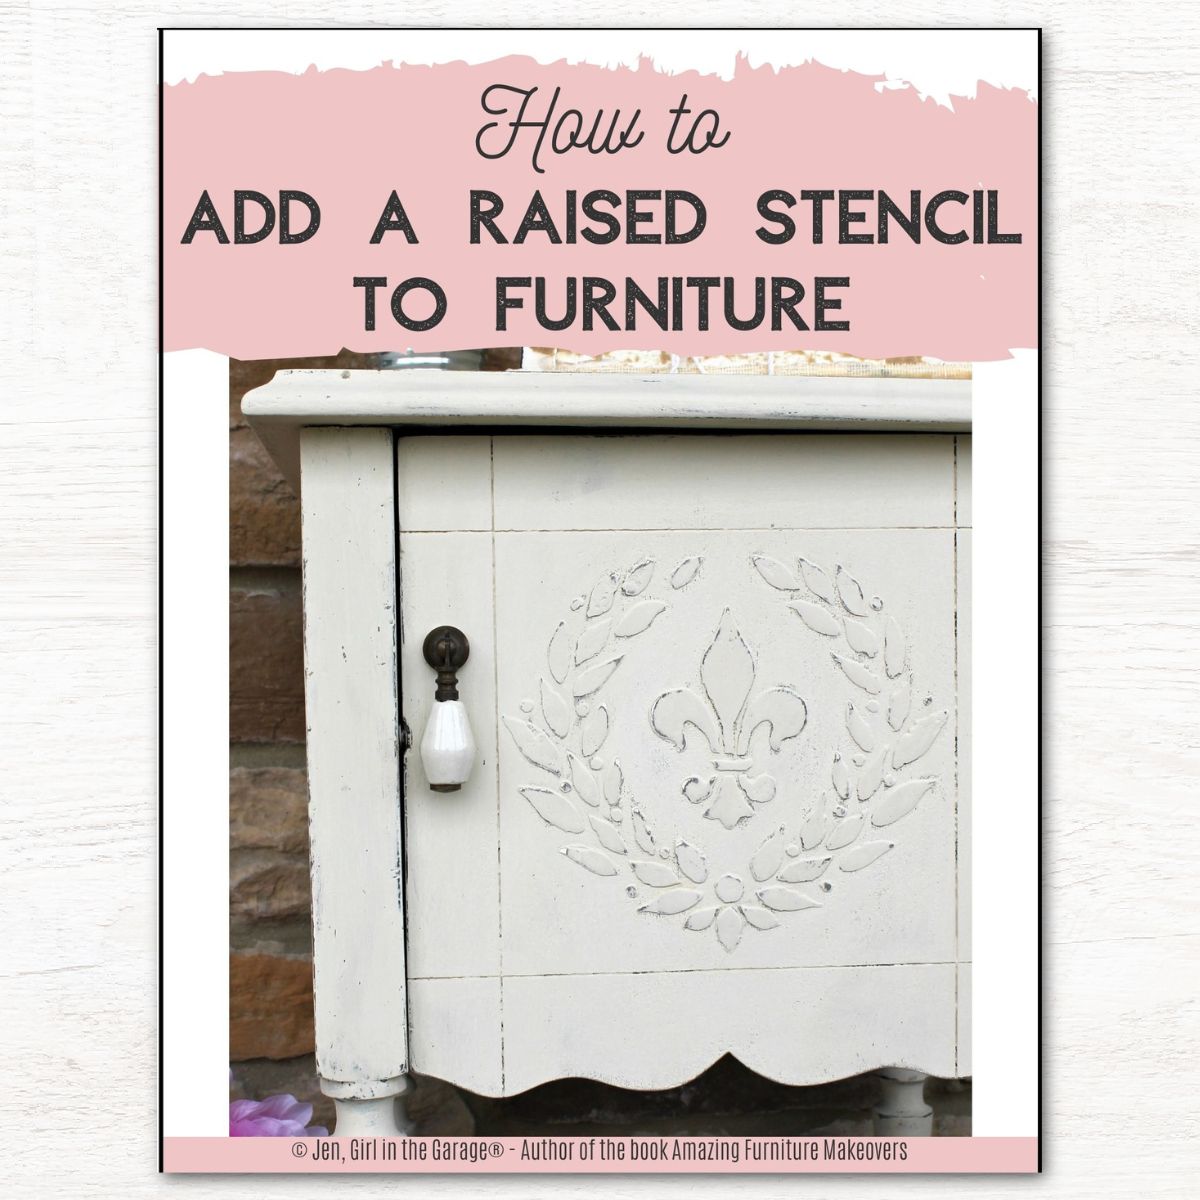 How to Add a Raised Stencil to Furniture